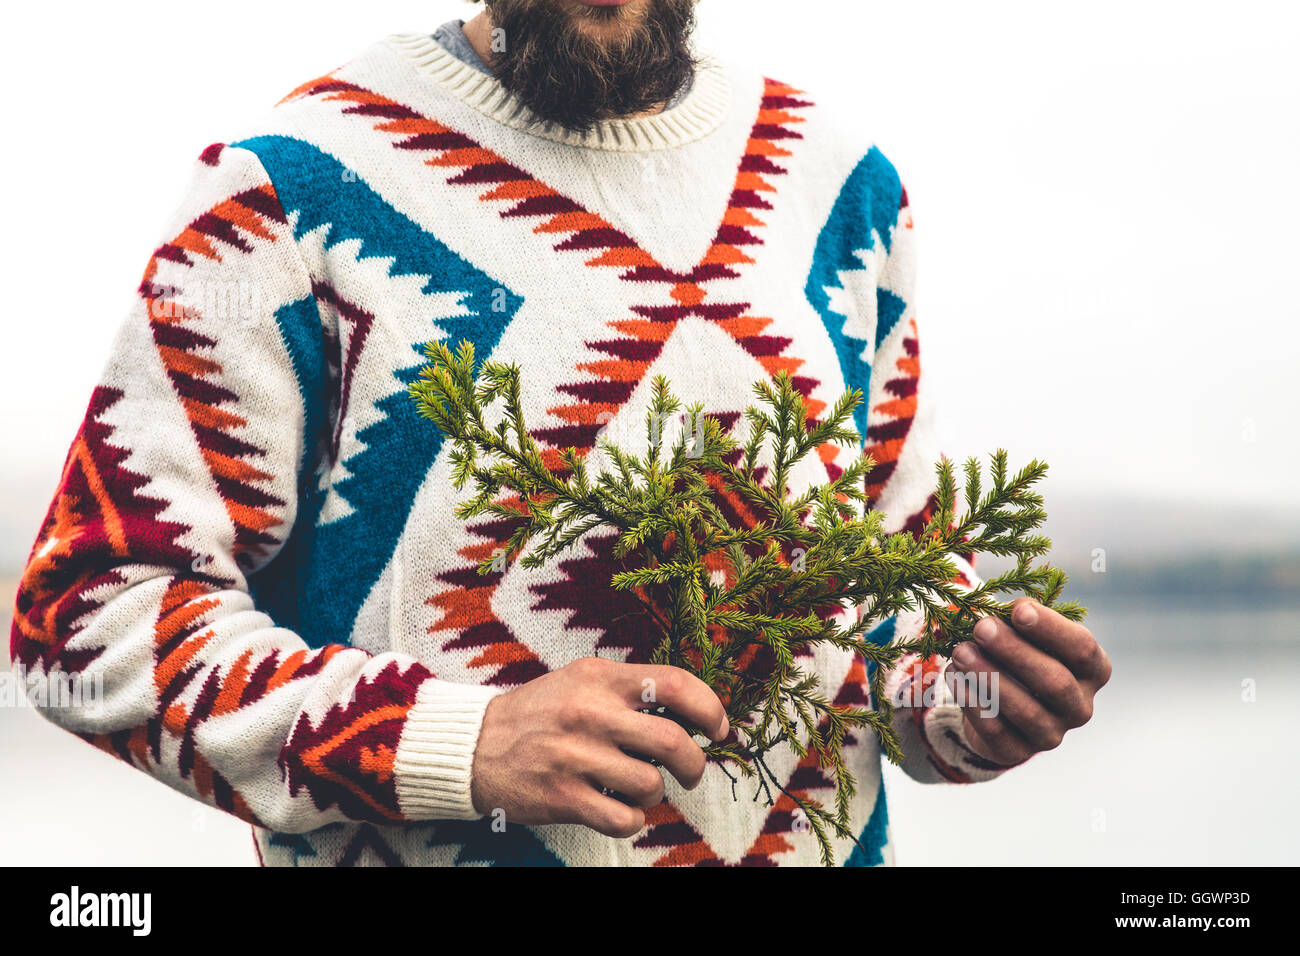 Man hands holding fir tree branch Fashion Travel Lifestyle wearing knitted sweater clothing outdoor foggy nature on background Stock Photo